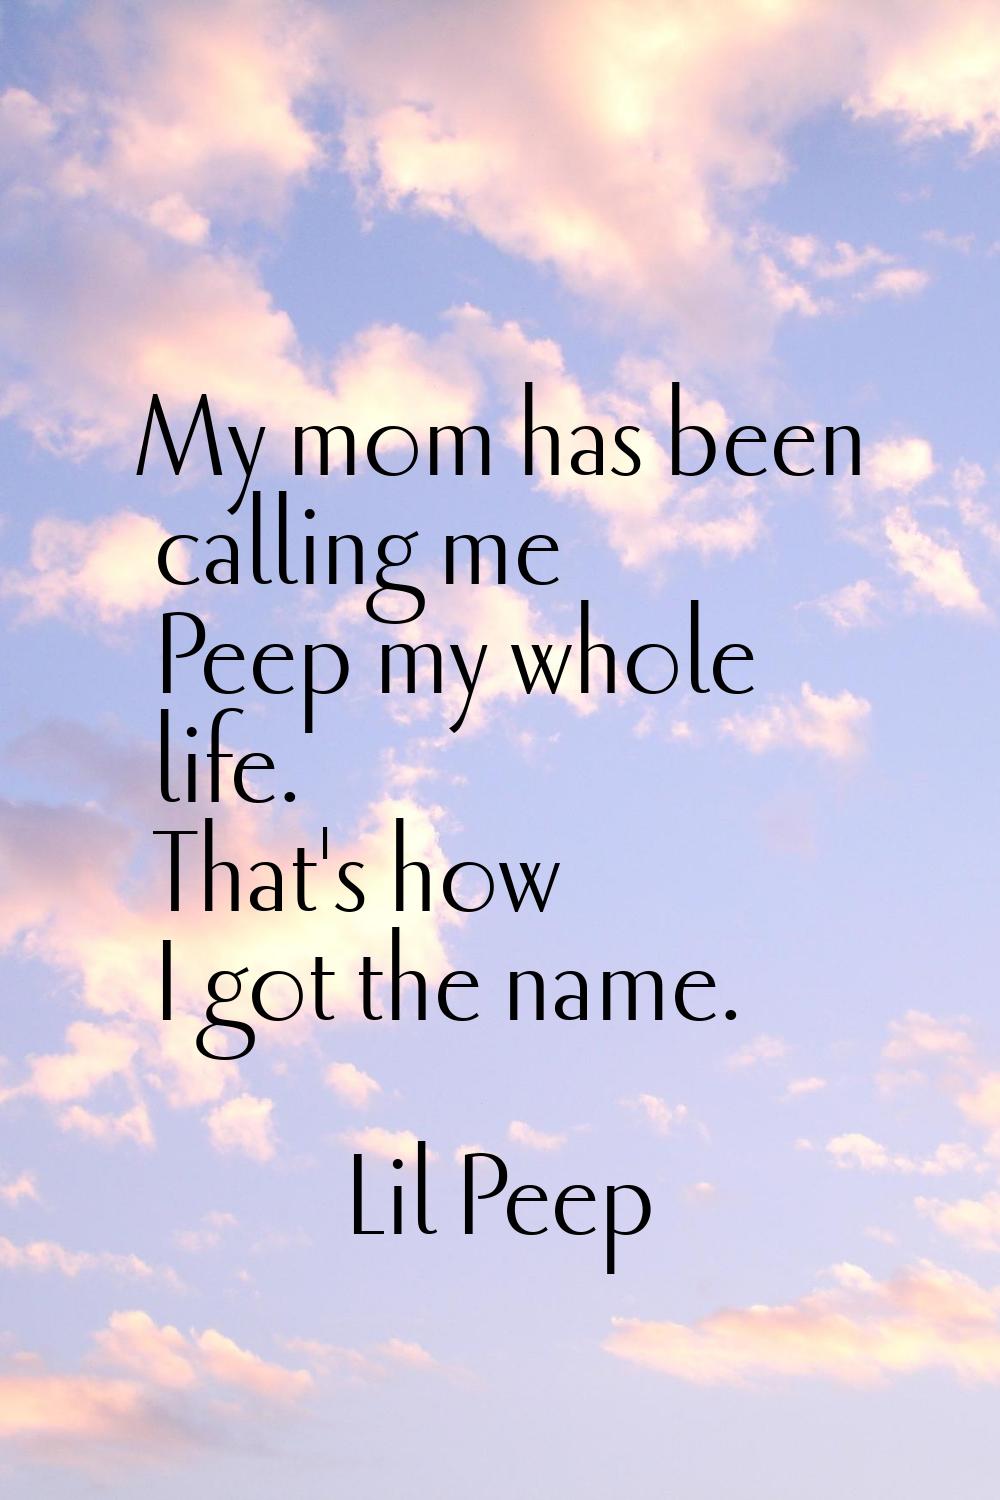 My mom has been calling me Peep my whole life. That's how I got the name.